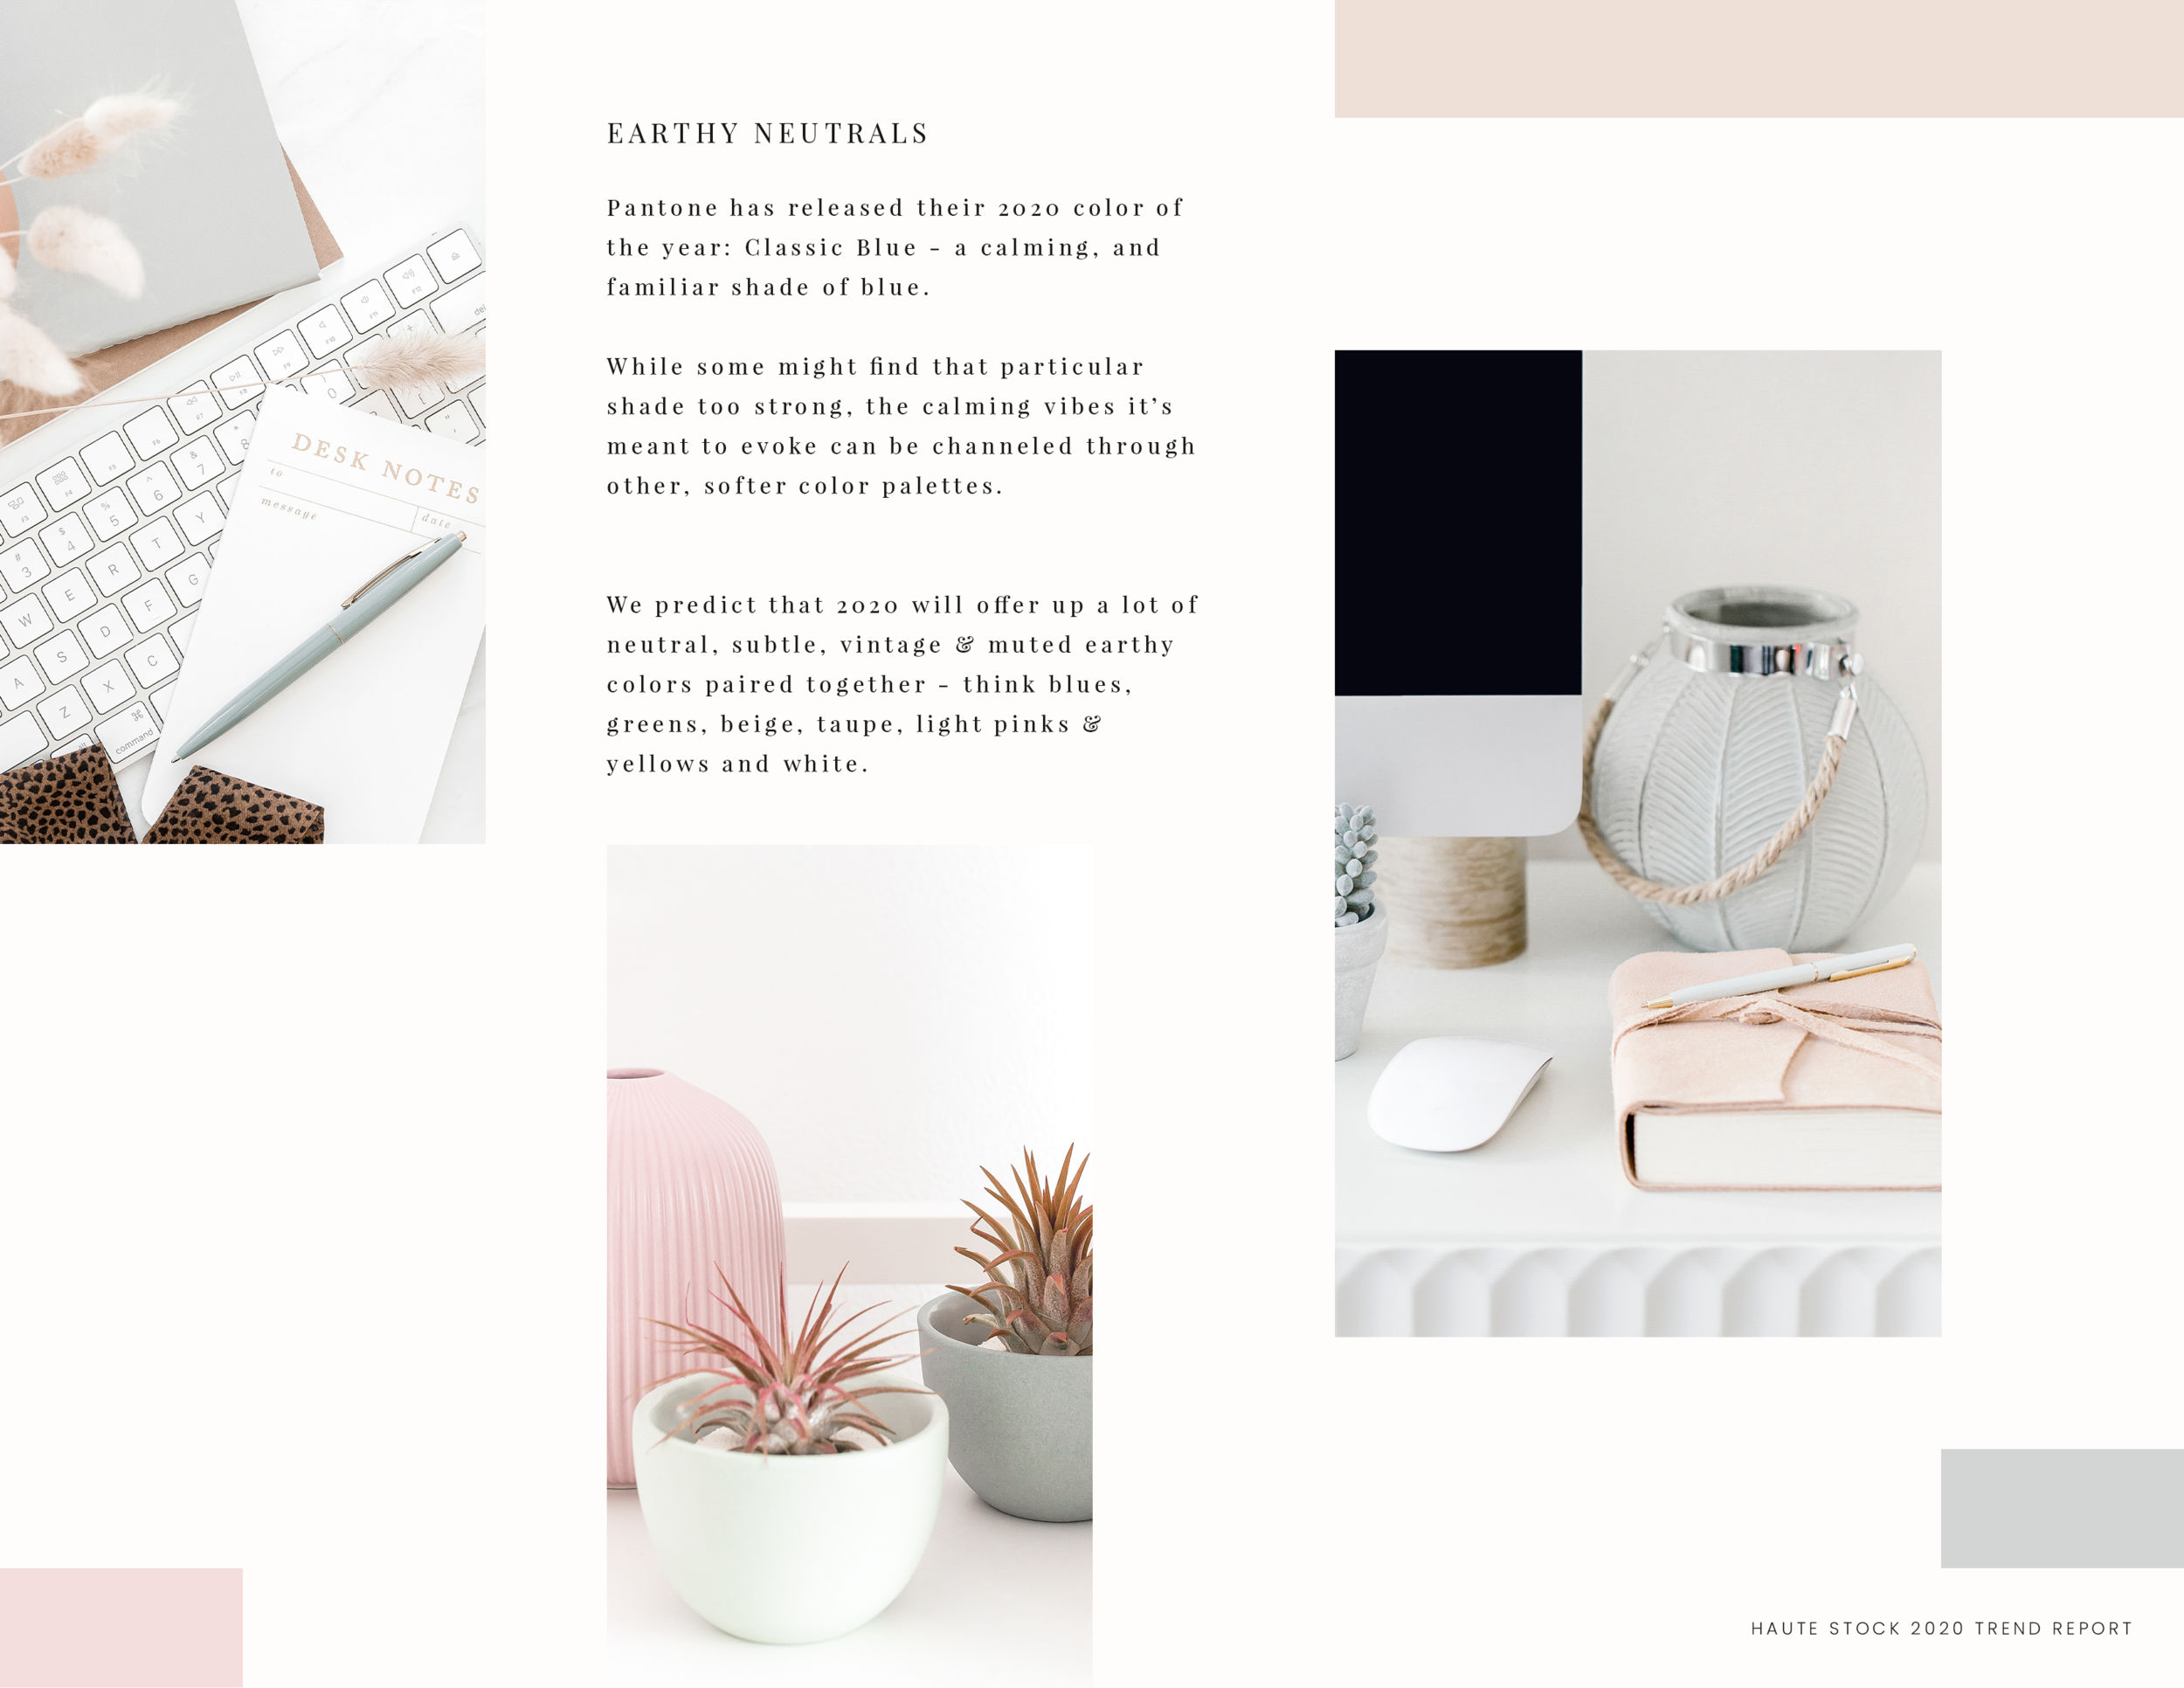 Earthy Neutral Brand Color Palette Stock Photos from Haute Stock